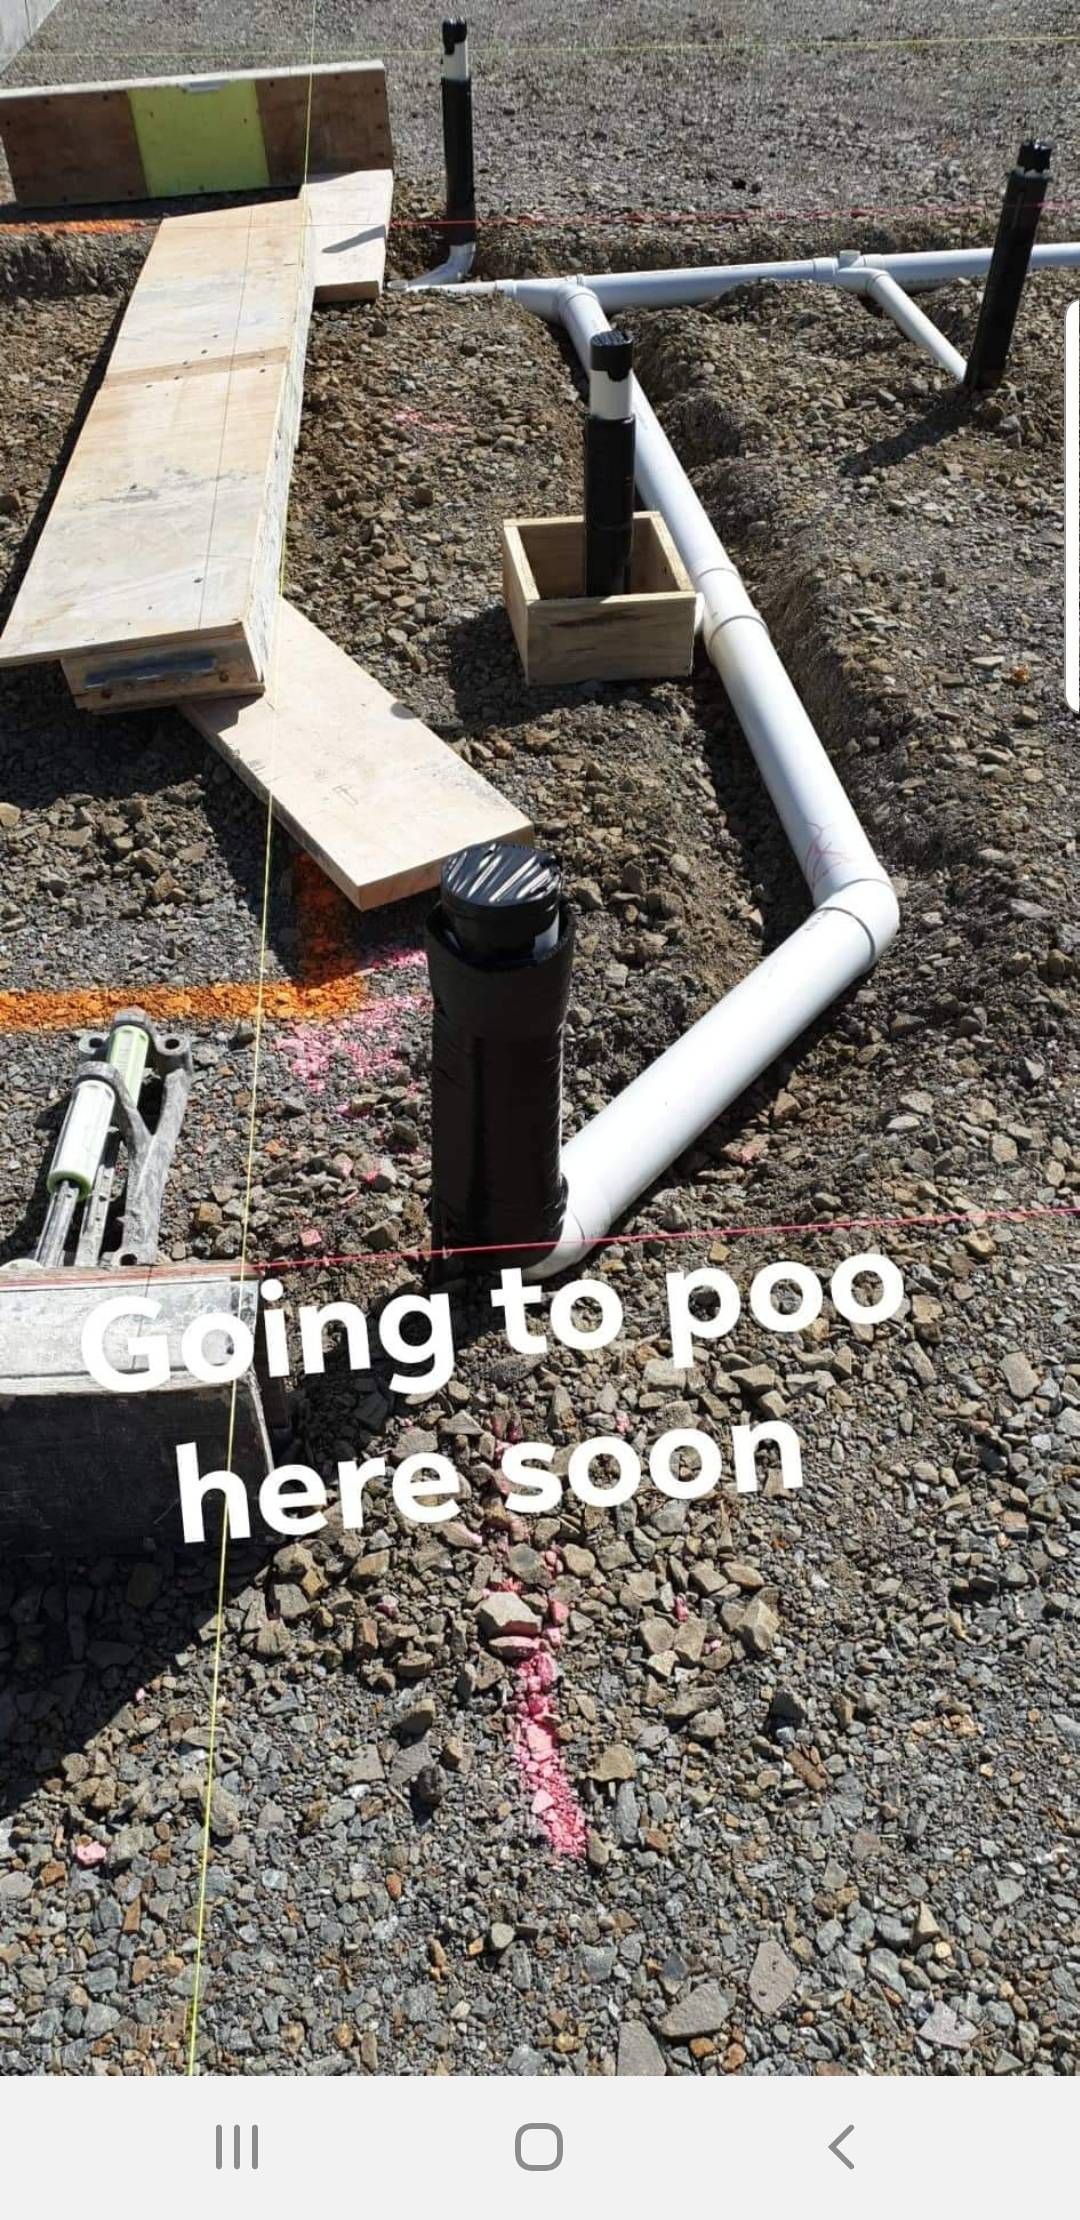 My friends building a home for himself and sent me this